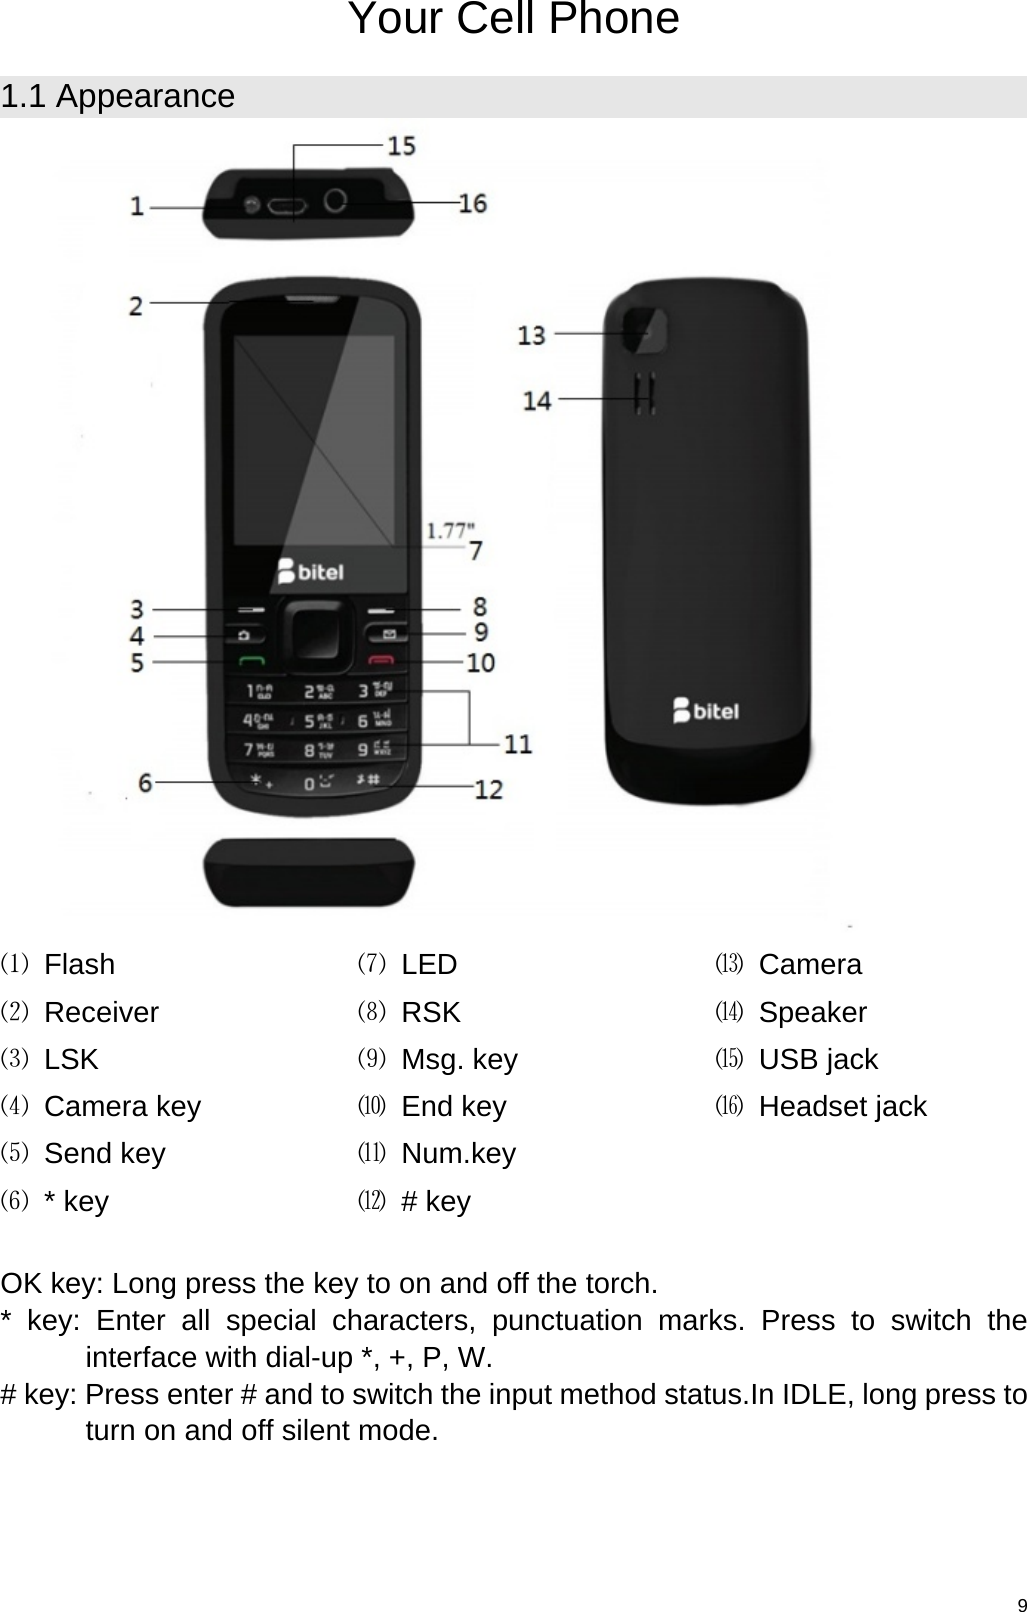   9Your Cell Phone 1.1 Appearance  ⑴ Flash ⑵ Receiver  ⑶ LSK ⑷ Camera key ⑸ Send key  ⑹ * key ⑺ LED ⑻ RSK ⑼ Msg. key ⑽ End key ⑾ Num.key ⑿ # key ⒀ Camera ⒁ Speaker ⒂ USB jack ⒃ Headset jackOK key: Long press the key to on and off the torch. * key: Enter all special characters, punctuation marks. Press to switch the interface with dial-up *, +, P, W. # key: Press enter # and to switch the input method status.In IDLE, long press to turn on and off silent mode. 